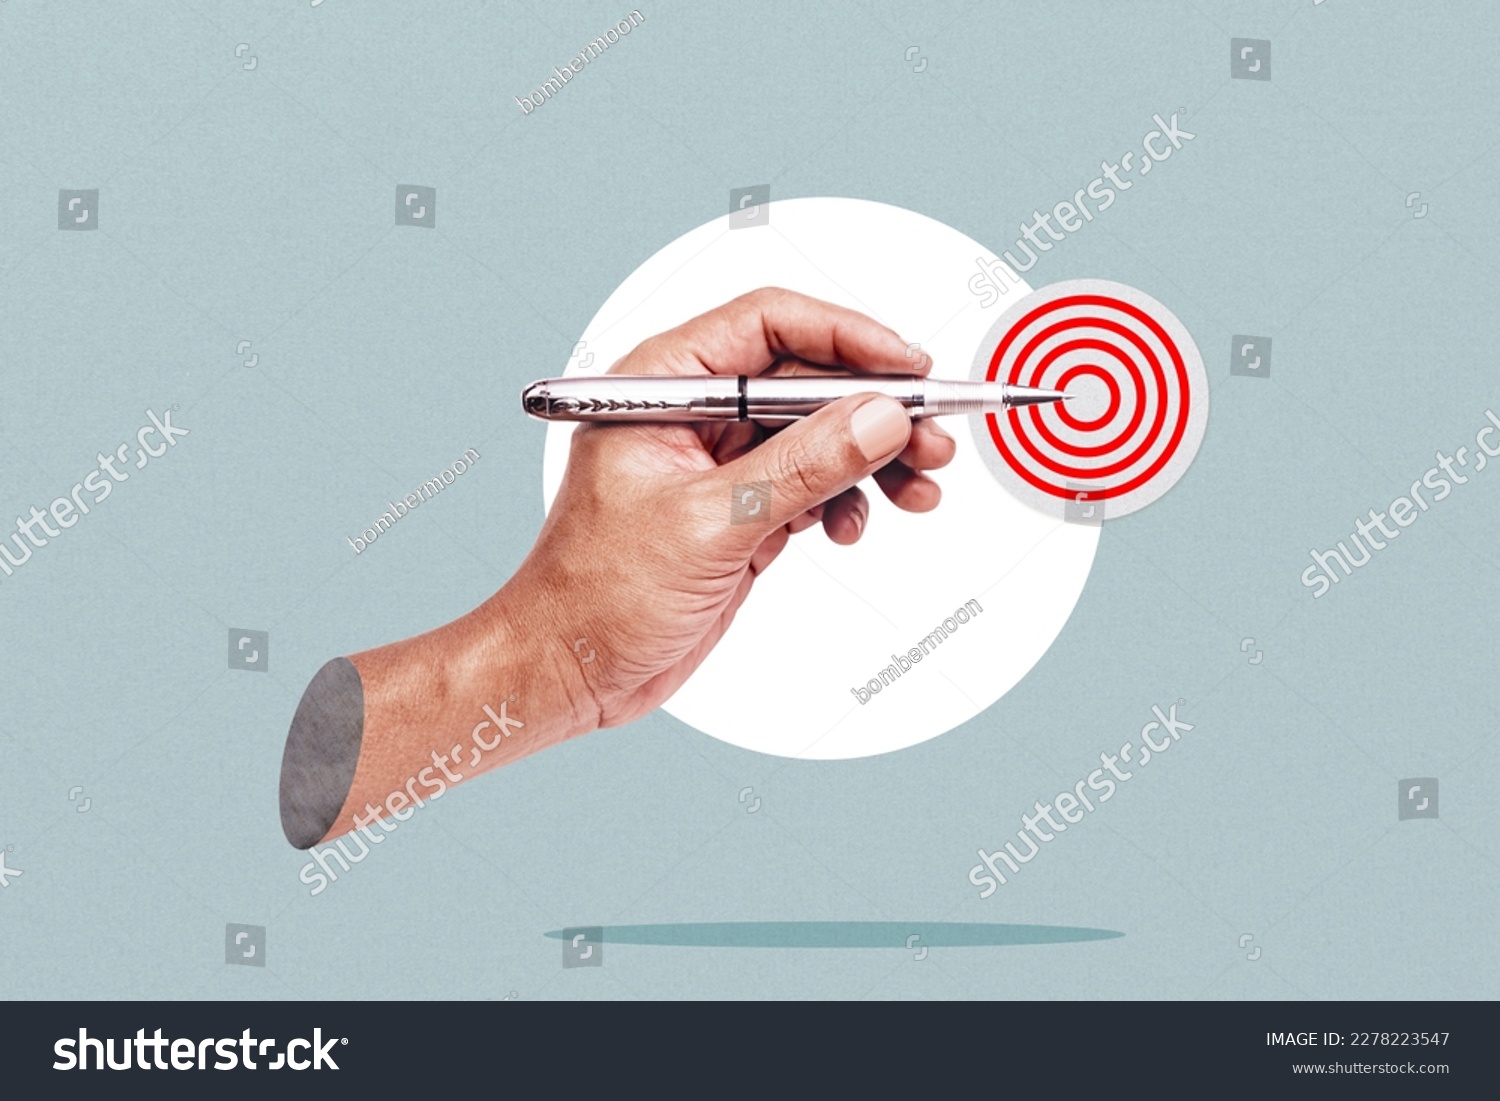 Businessman holding a pen at the target - business targeting, aiming, focus concept. Art collage. #2278223547